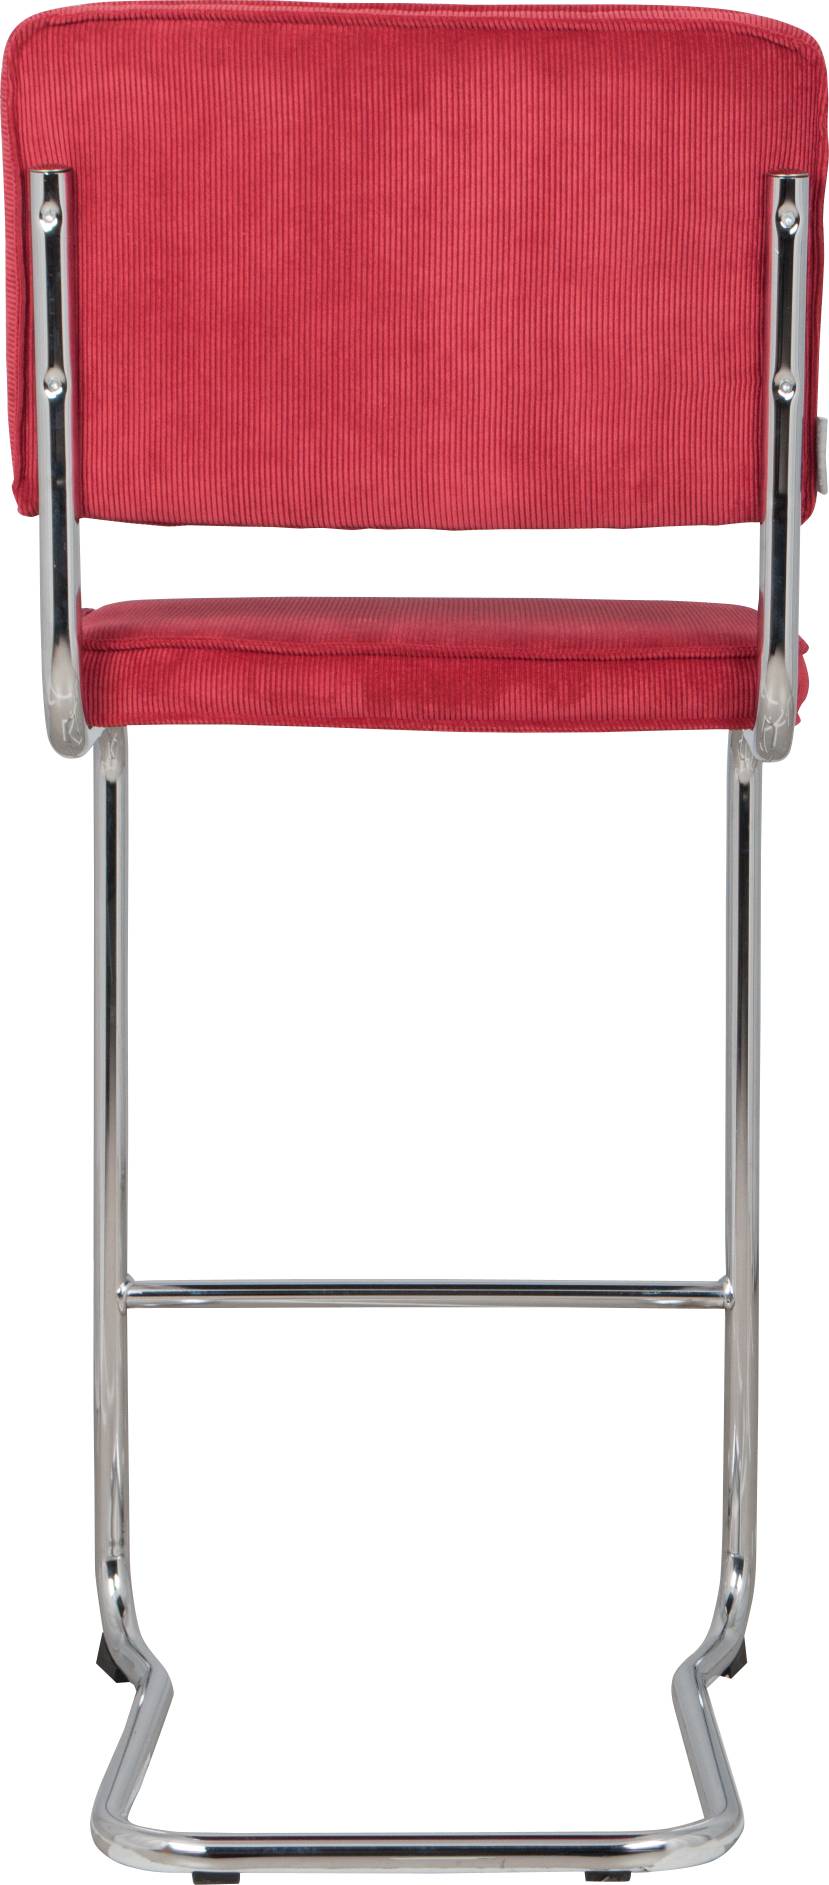 Zuiver | BARSTOOL RIDGE KINK RIB RED 21A Default Title